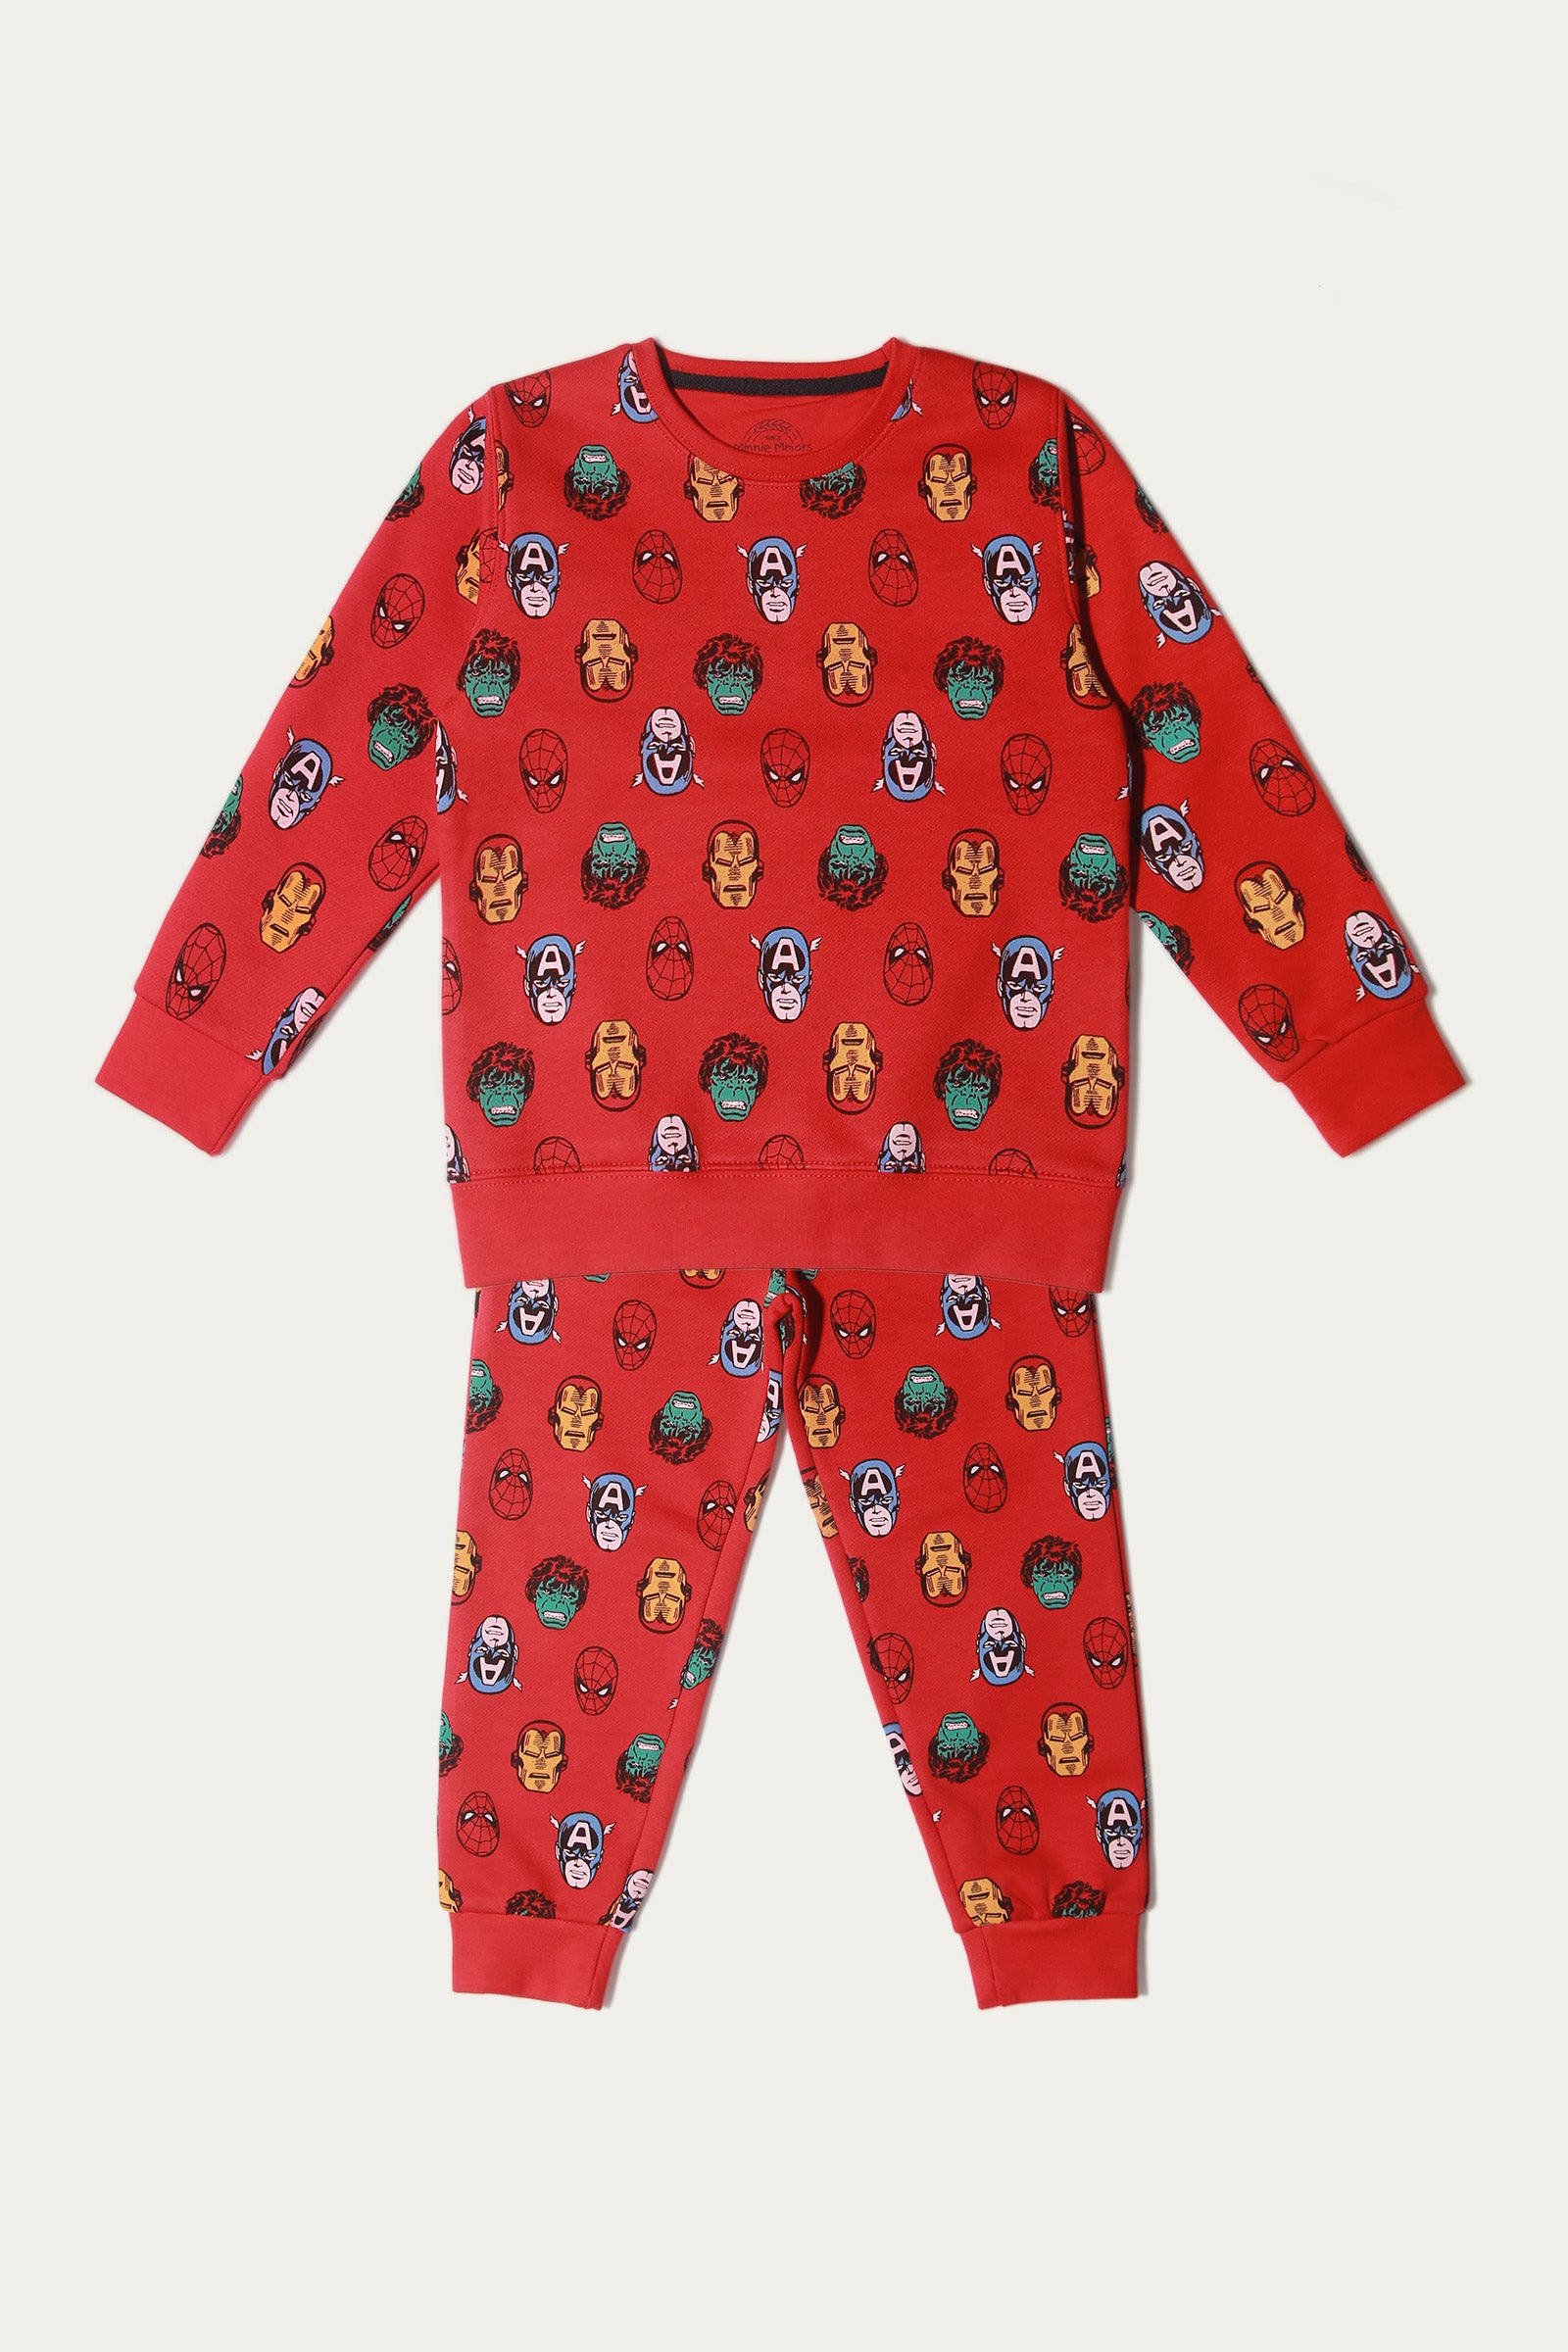 Cotton MOMS PET- Trendy night suit for babies, 3 pcs at Rs 299/piece in  Lucknow